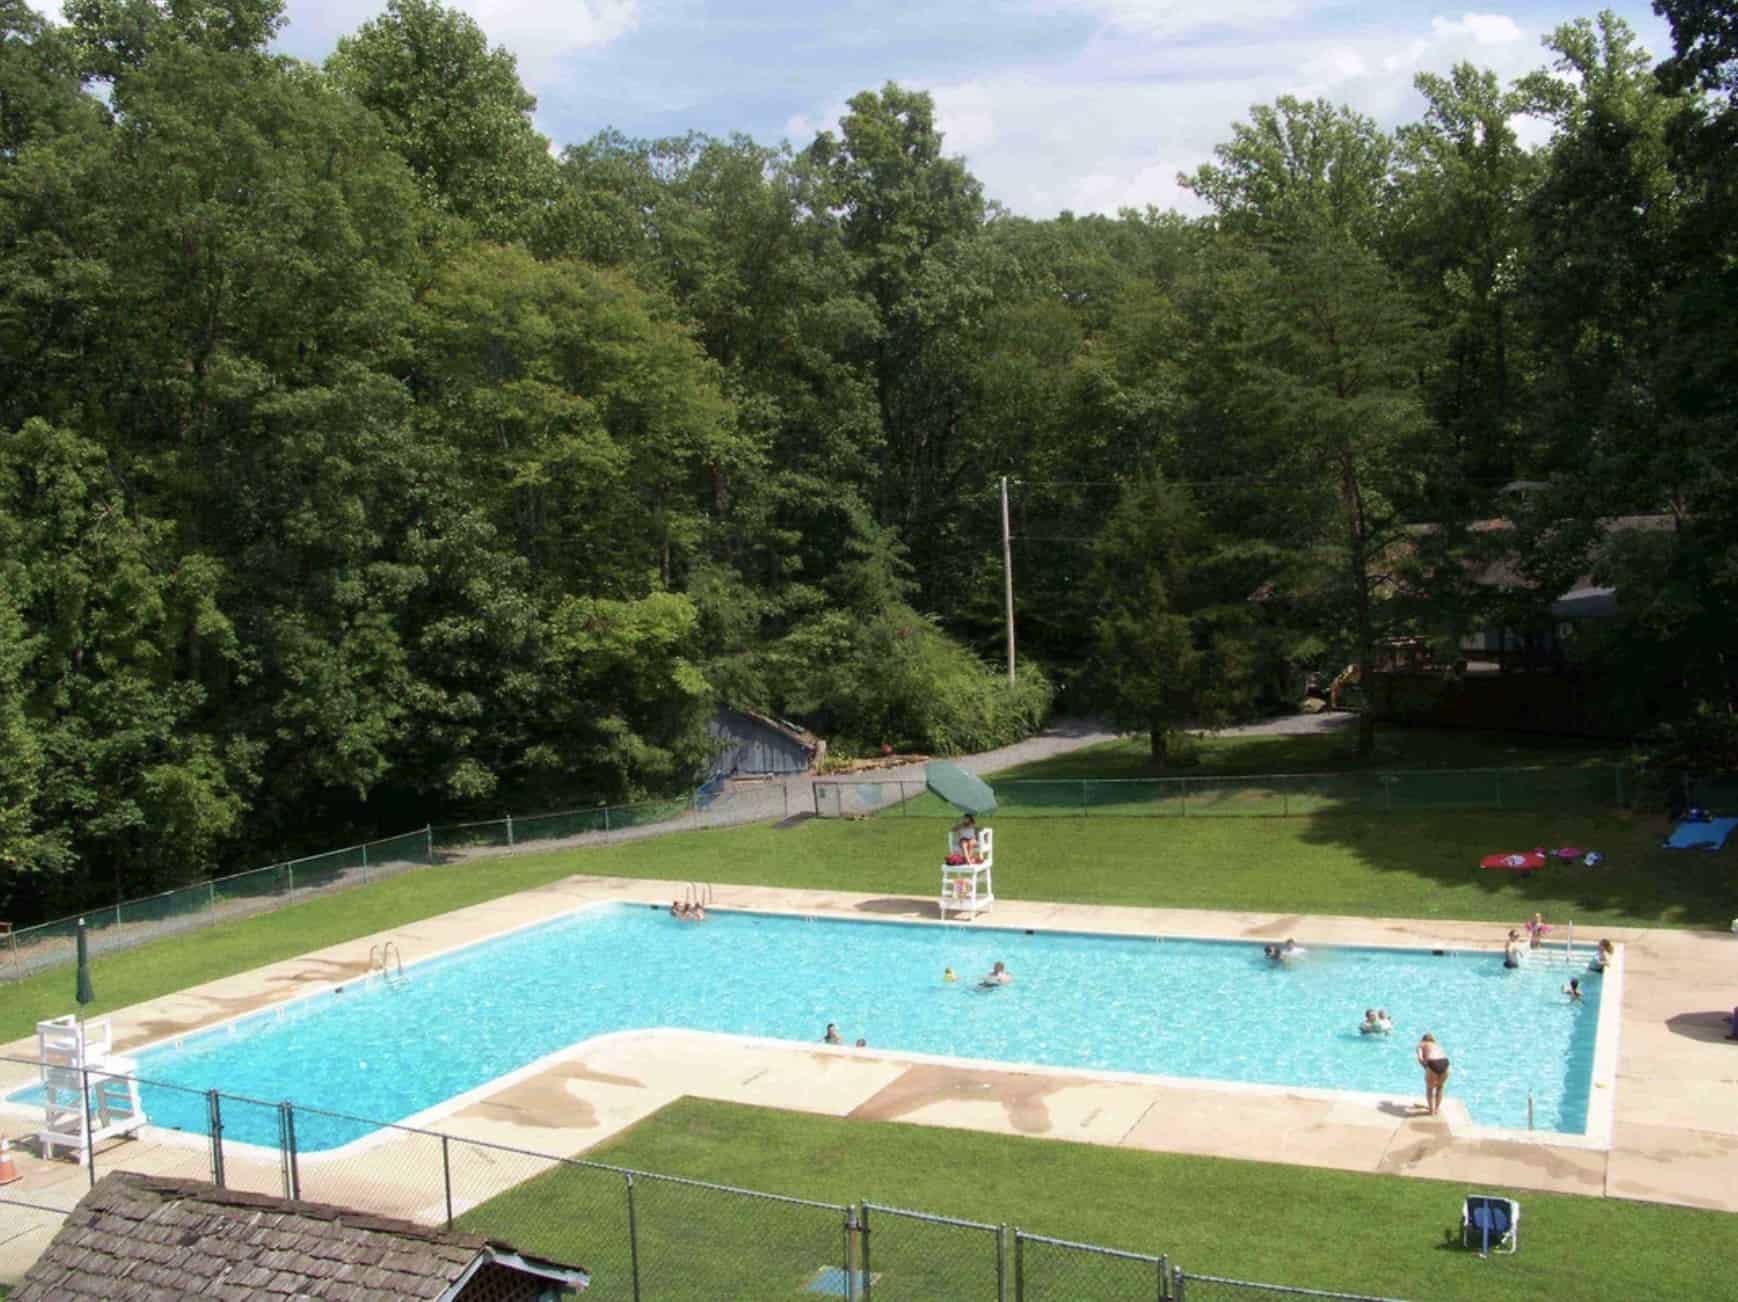 A swimming pool photographed from an elevated view.